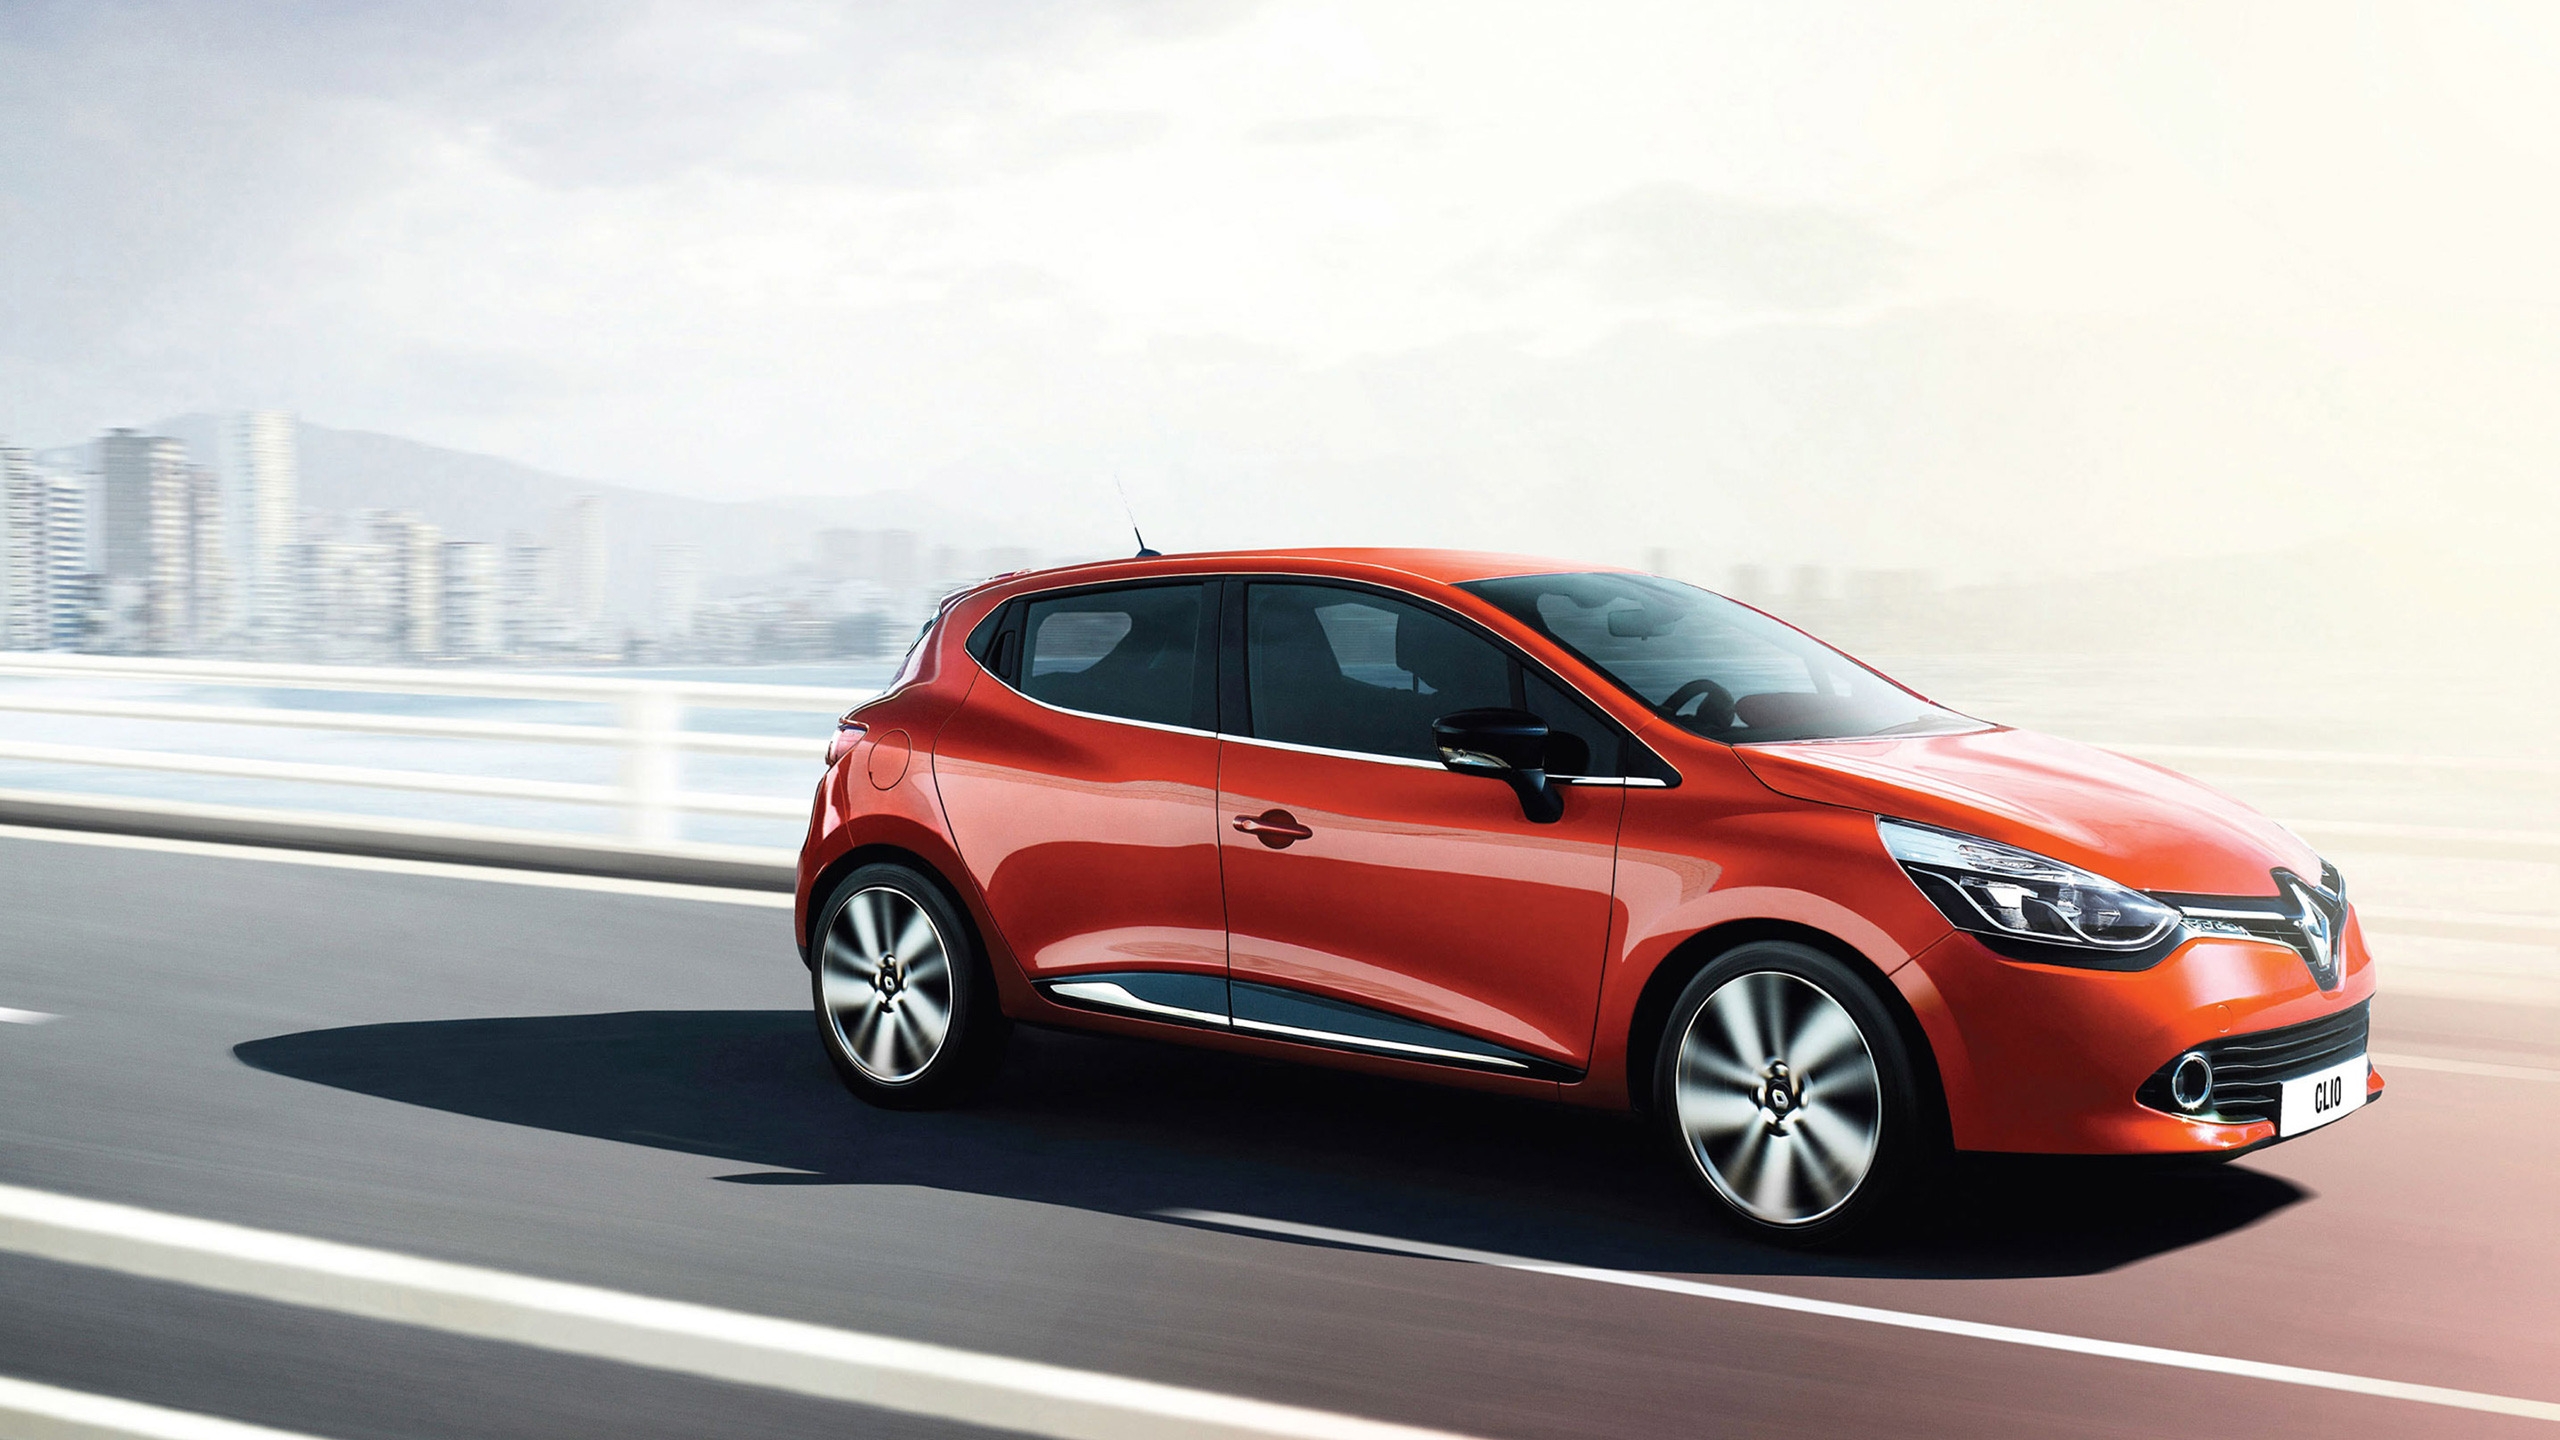 2013 Renault Clio for 2560x1440 HDTV resolution